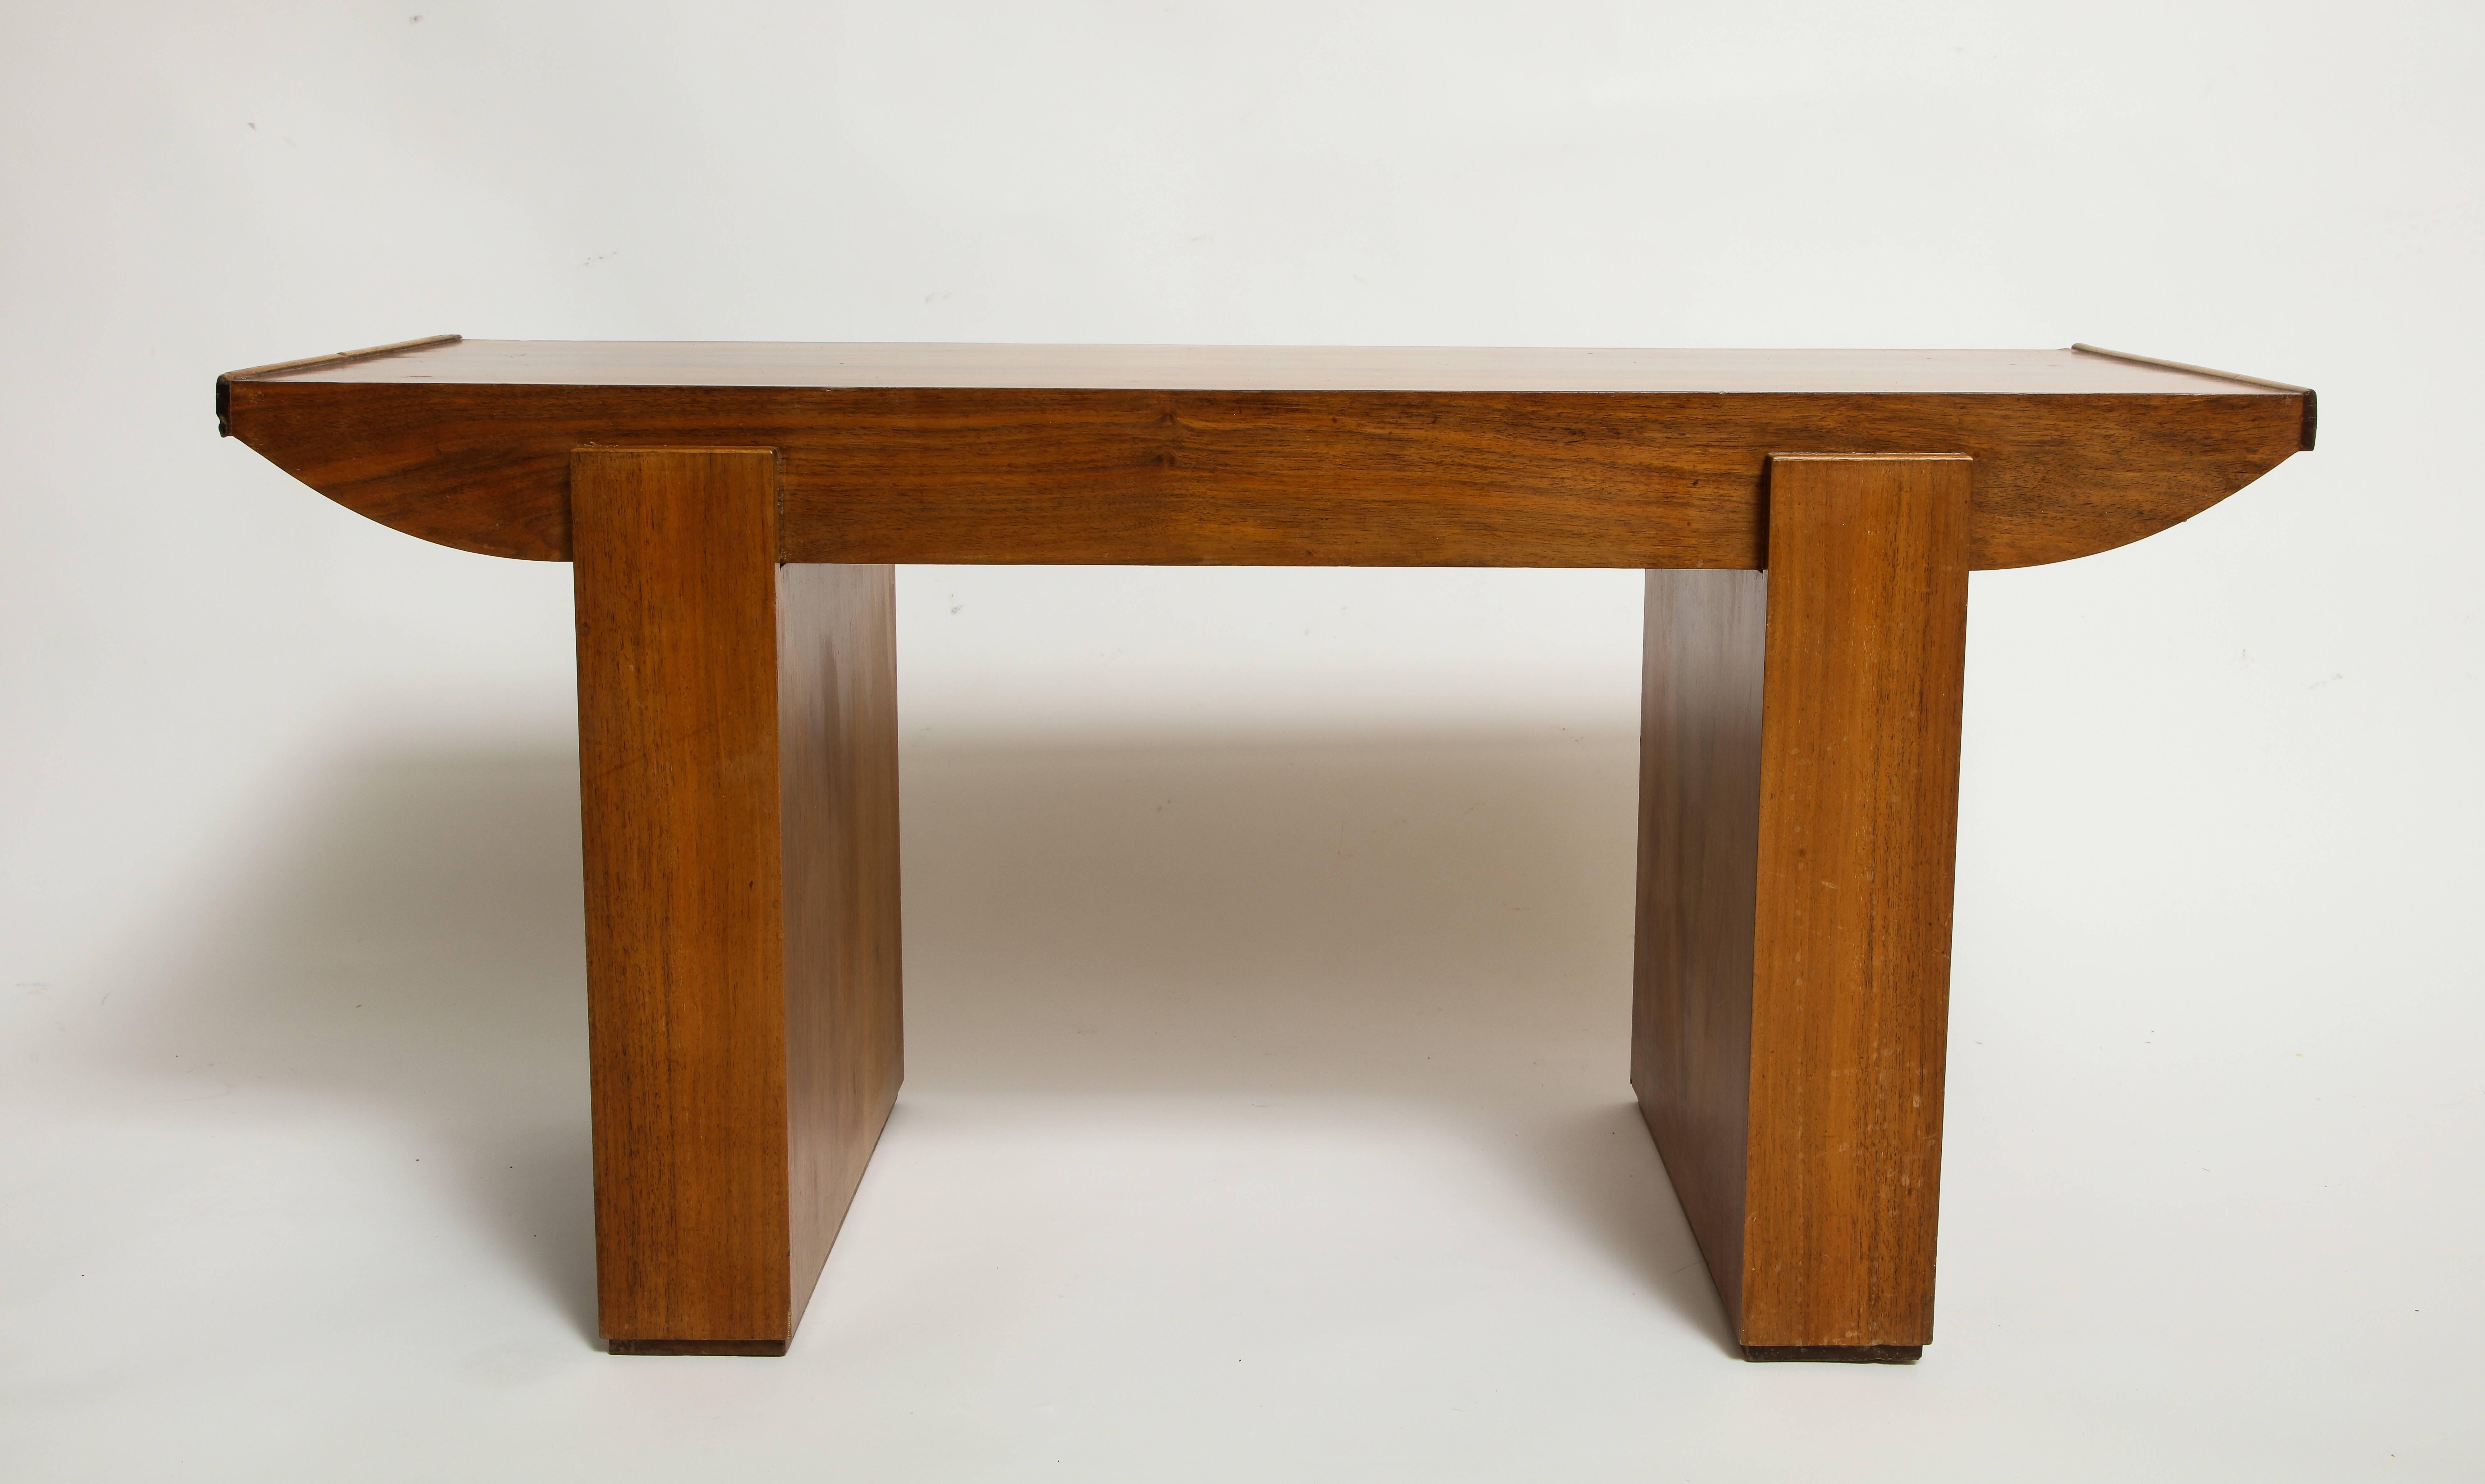 French Dominique Attr. Deco Walnut Table Bench Modernist 1930 Mid Century France